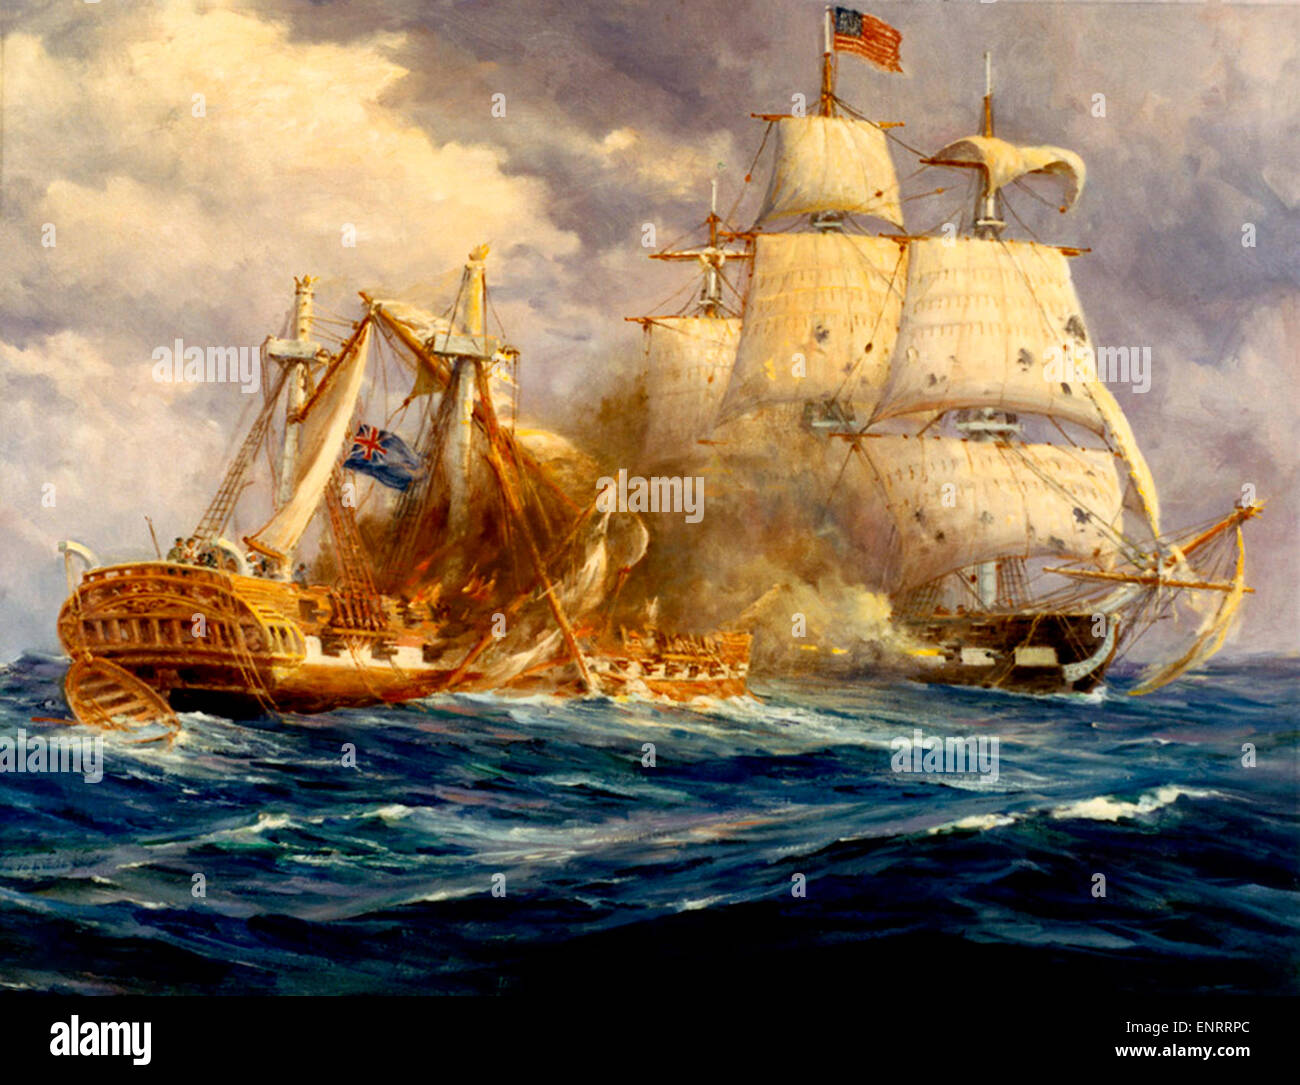 Victory at sea by USS Constitution over HMS Guerriere during the War of 1812 Stock Photo